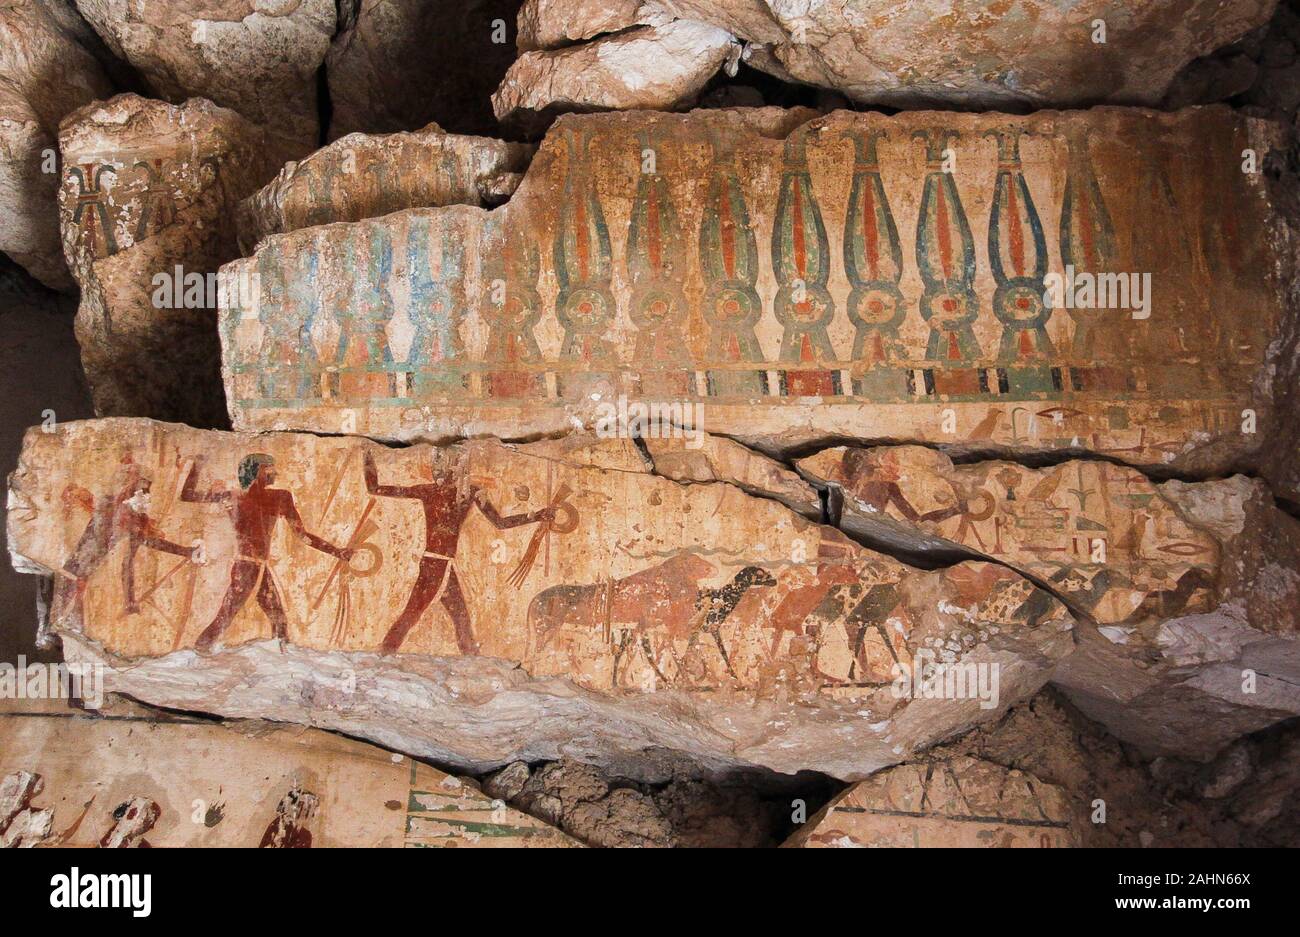 Middle Egypt, Deir el Bersha, the tomb of Djehutyhotep dates from the Middle Kingdom. Main room, destroyed wall, sheperds lead their animals. Stock Photo